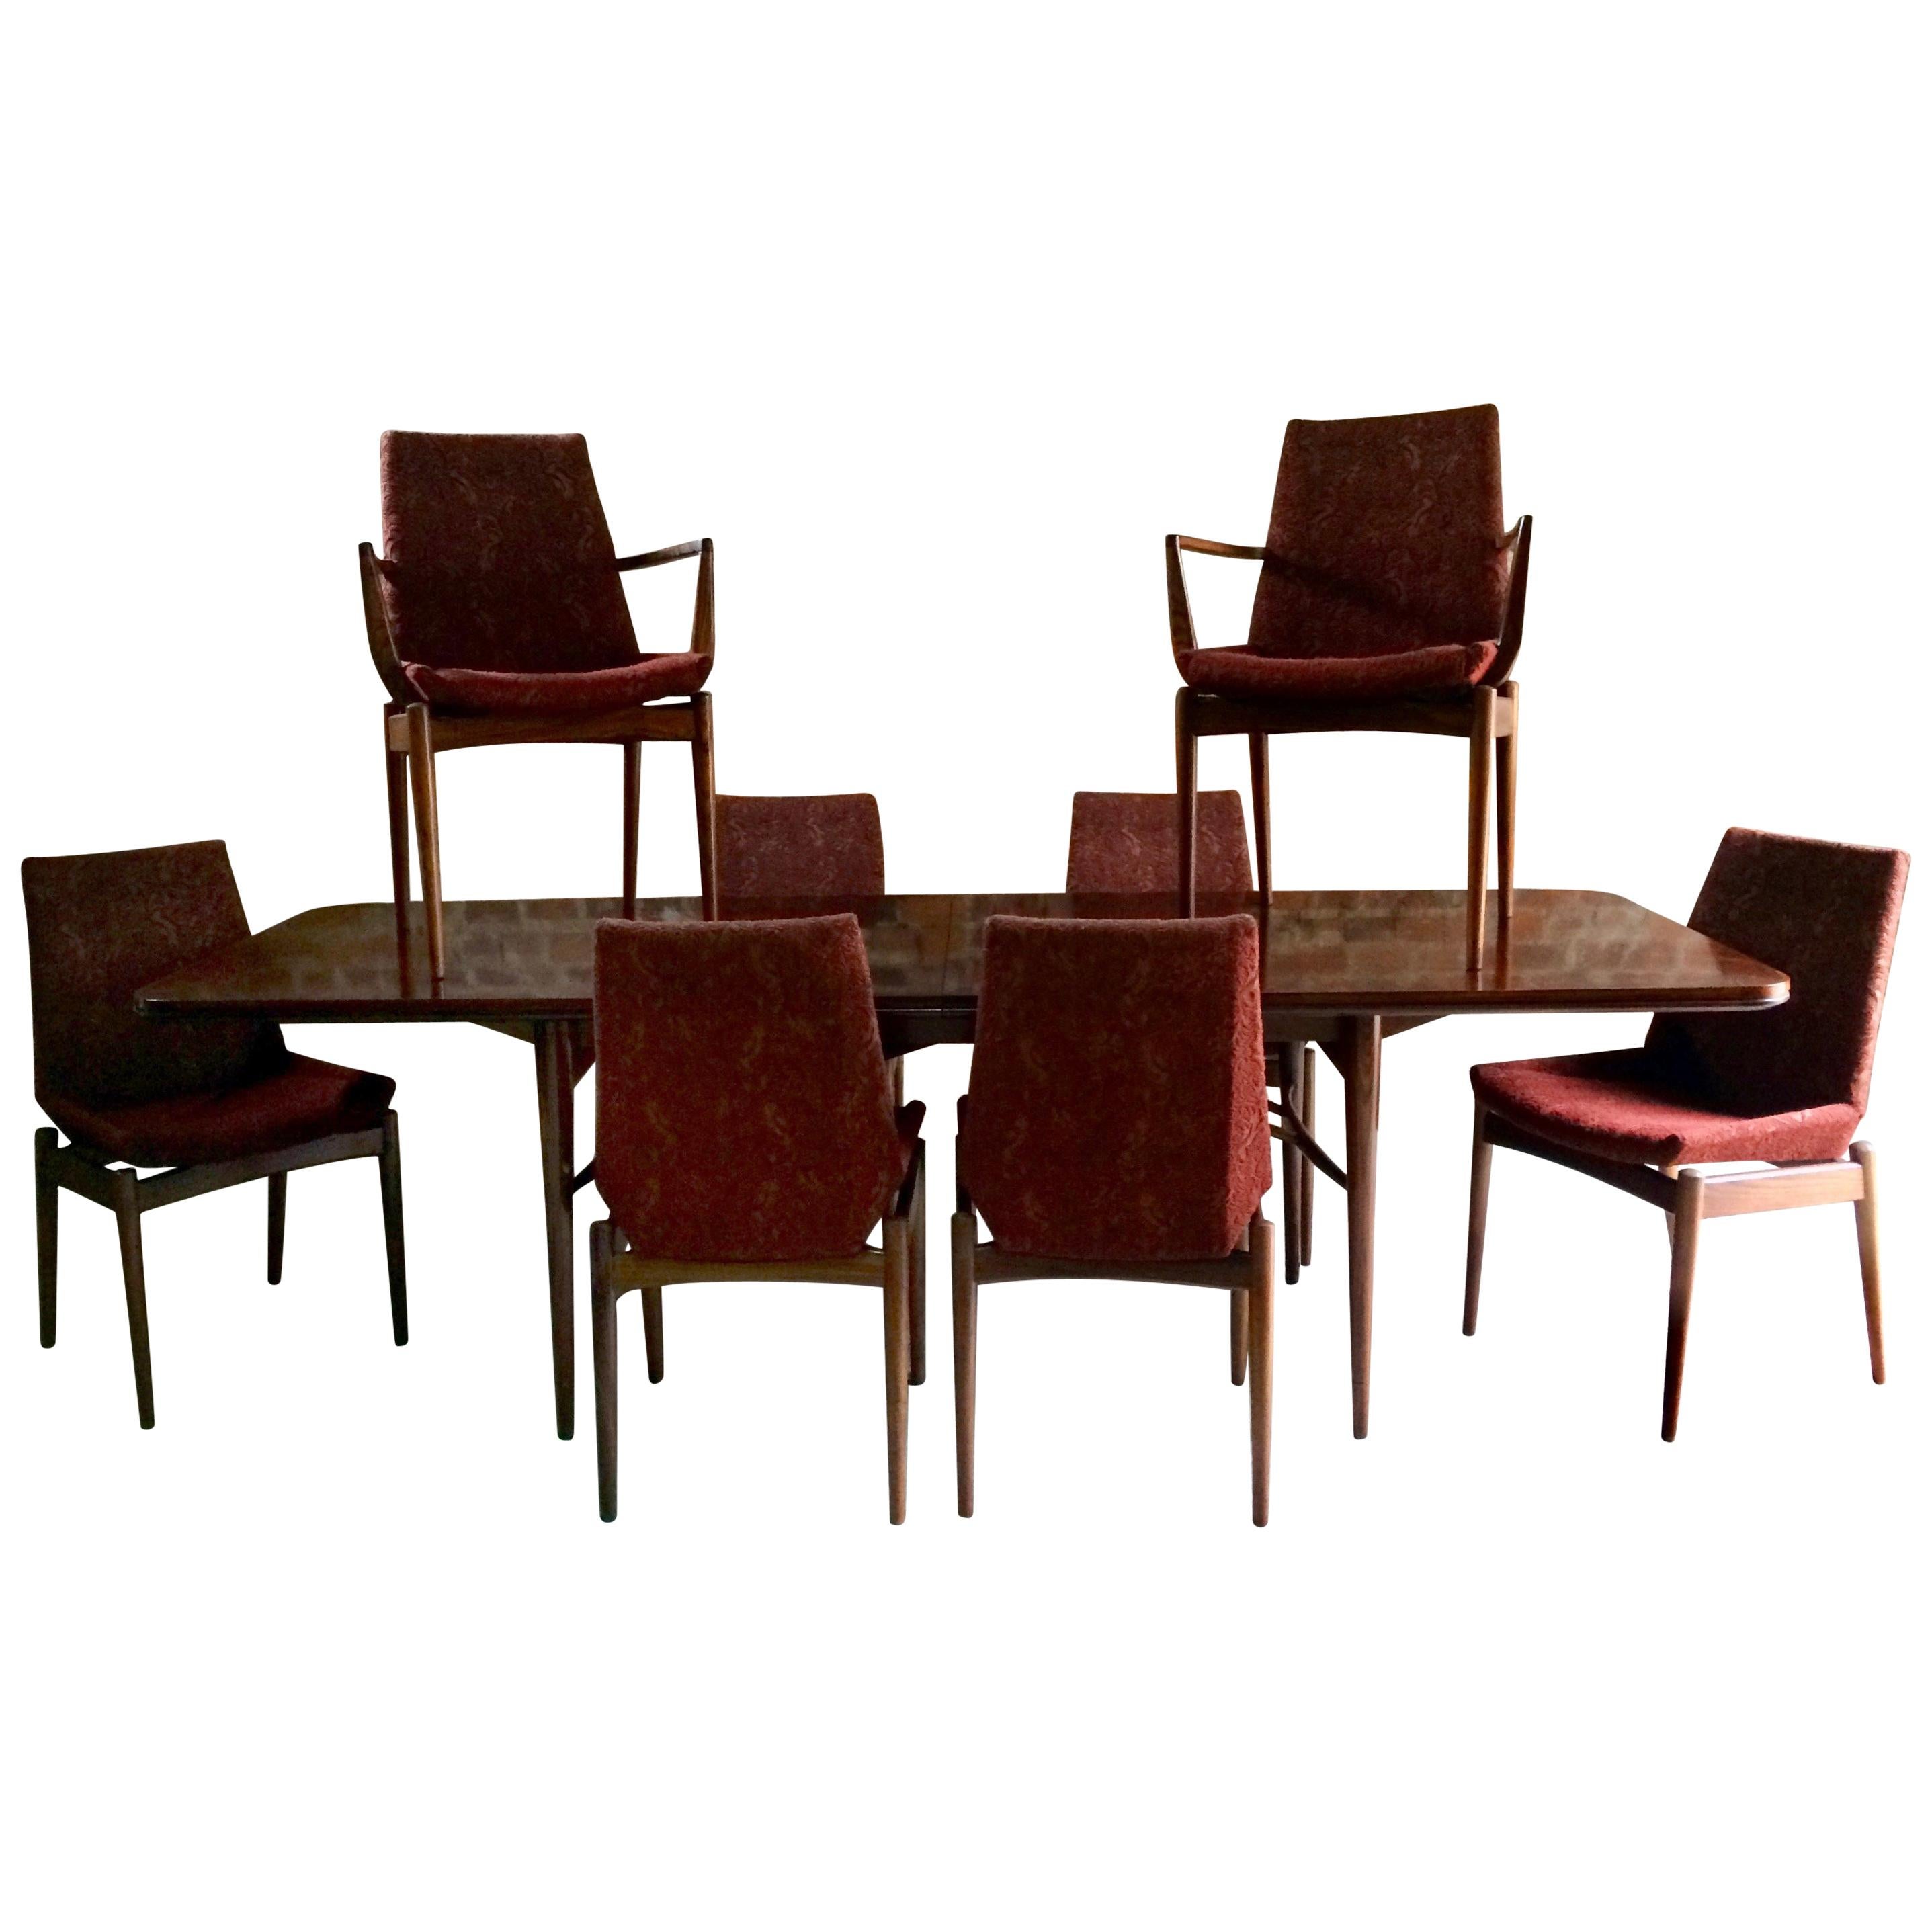 Robert Heritage for Archie Shine Rosewood Dining Table & 8 Chairs Hamilton Range